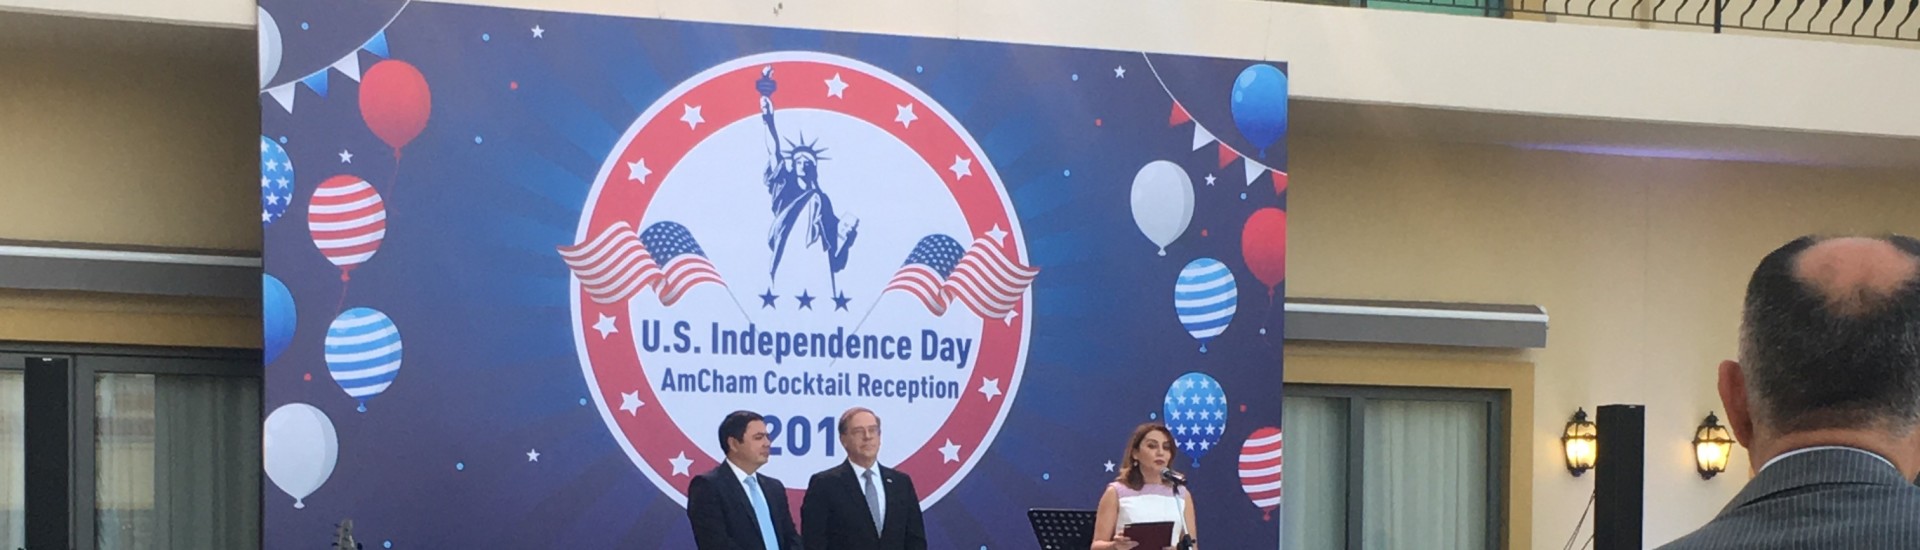 Gumru Eyvazova and Sabina 
Gasimova attended the U.S. 
Independence Day Cocktail 
Reception in Azerbaijan